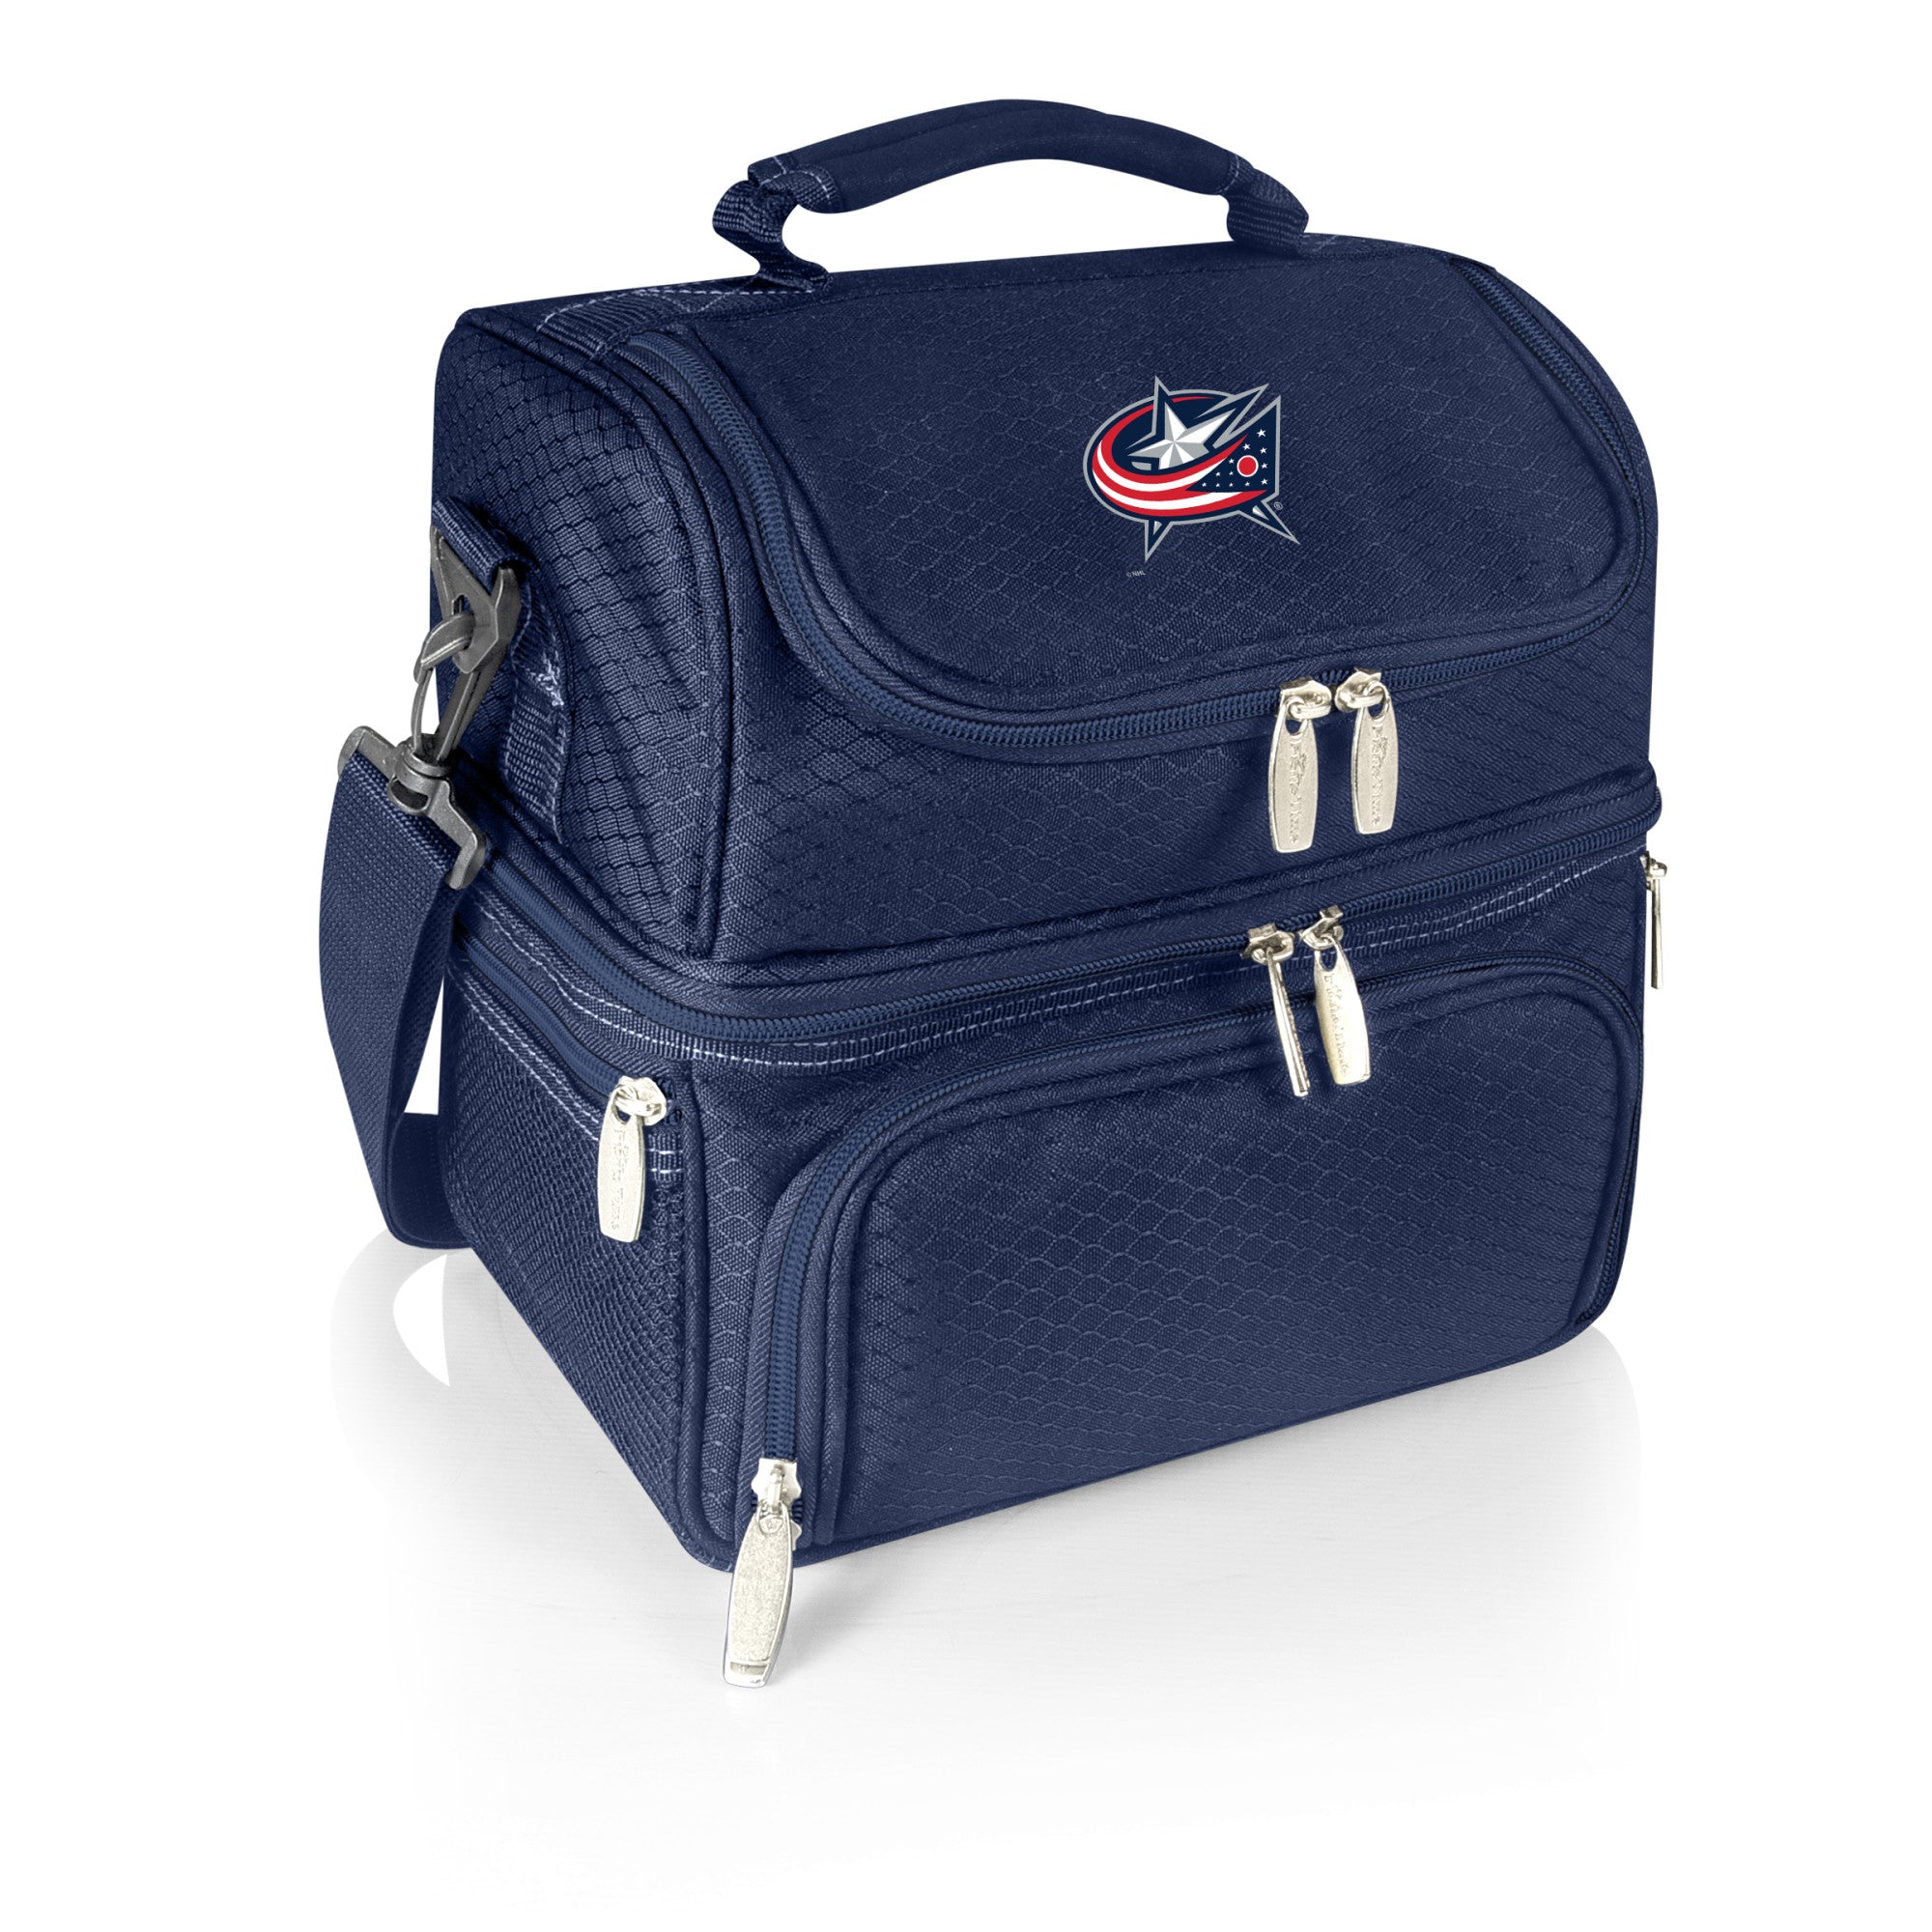 Columbus Blue Jackets - Pranzo Lunch Bag Cooler with Utensils